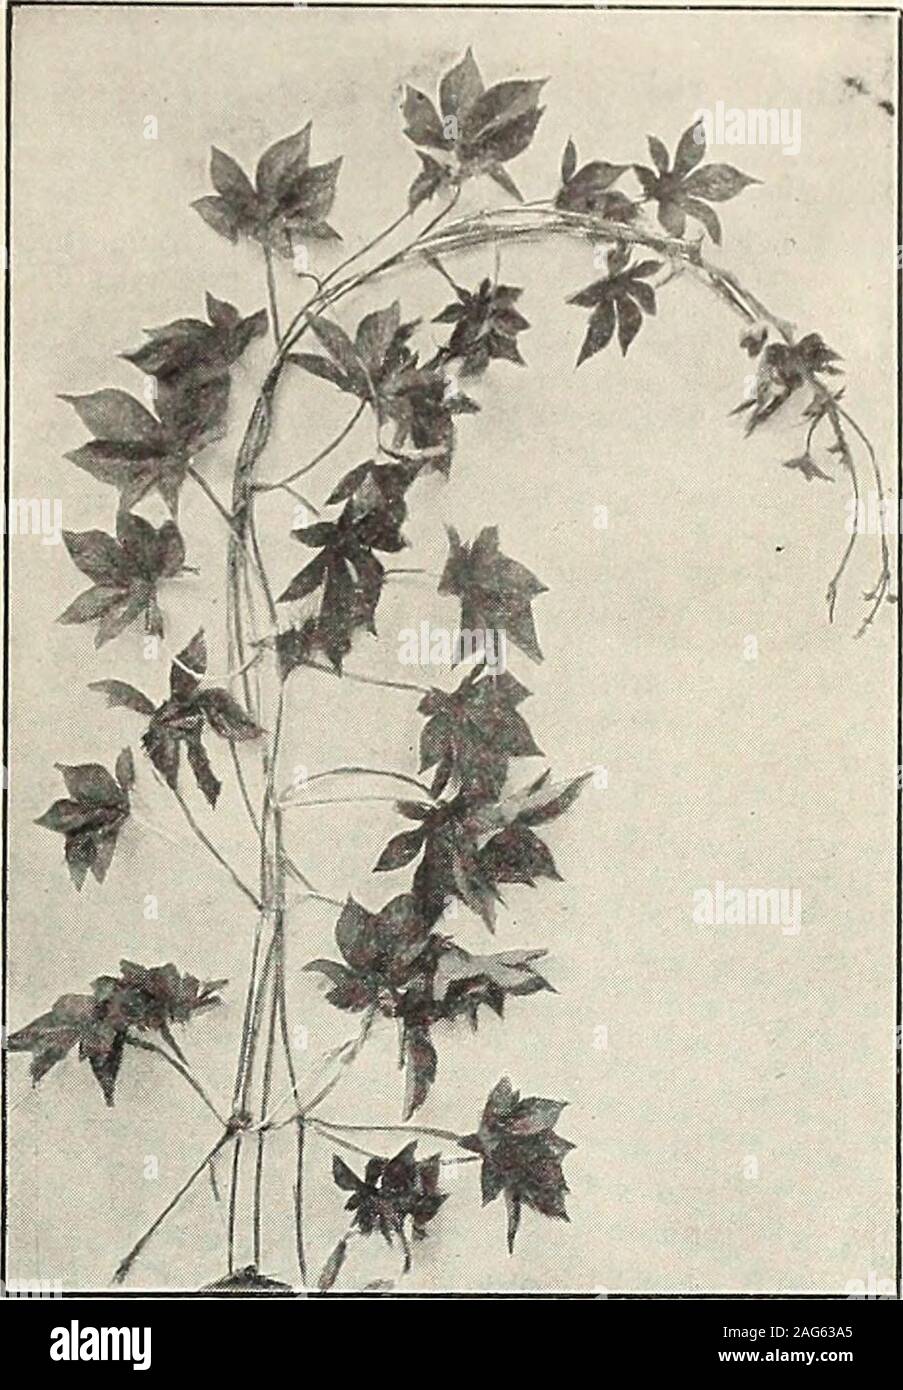 . Rawson's garden manual / W.W. Rawson & Co.. IncarviUea Delavayi Humulus Japonicus Ipomoea imperialis, continued. is very large and often variegated. 10 feet.Pkt. 10 cts., oz. 30 cts., lb. $4. 4370 —grandiflora alba (Moonflower). Large heart-shaped leaves and large, pure white flowers,which open only late in the evening. 10 feet.Pkt. 10 cts., oz. 60 cts. 4375 —rubro-coerulea (Heavenly Blue). Beautiful,large, sky-blue flowers. 15 feet. Pkt. 10 cts.,oz. $1. 4380 —setosa (Brazilian Morning-Glory). Large, orna-mental foliage, with bright rose flowers. Growsvery fast and is dense. Pkt. 10 cts., oz Stock Photo